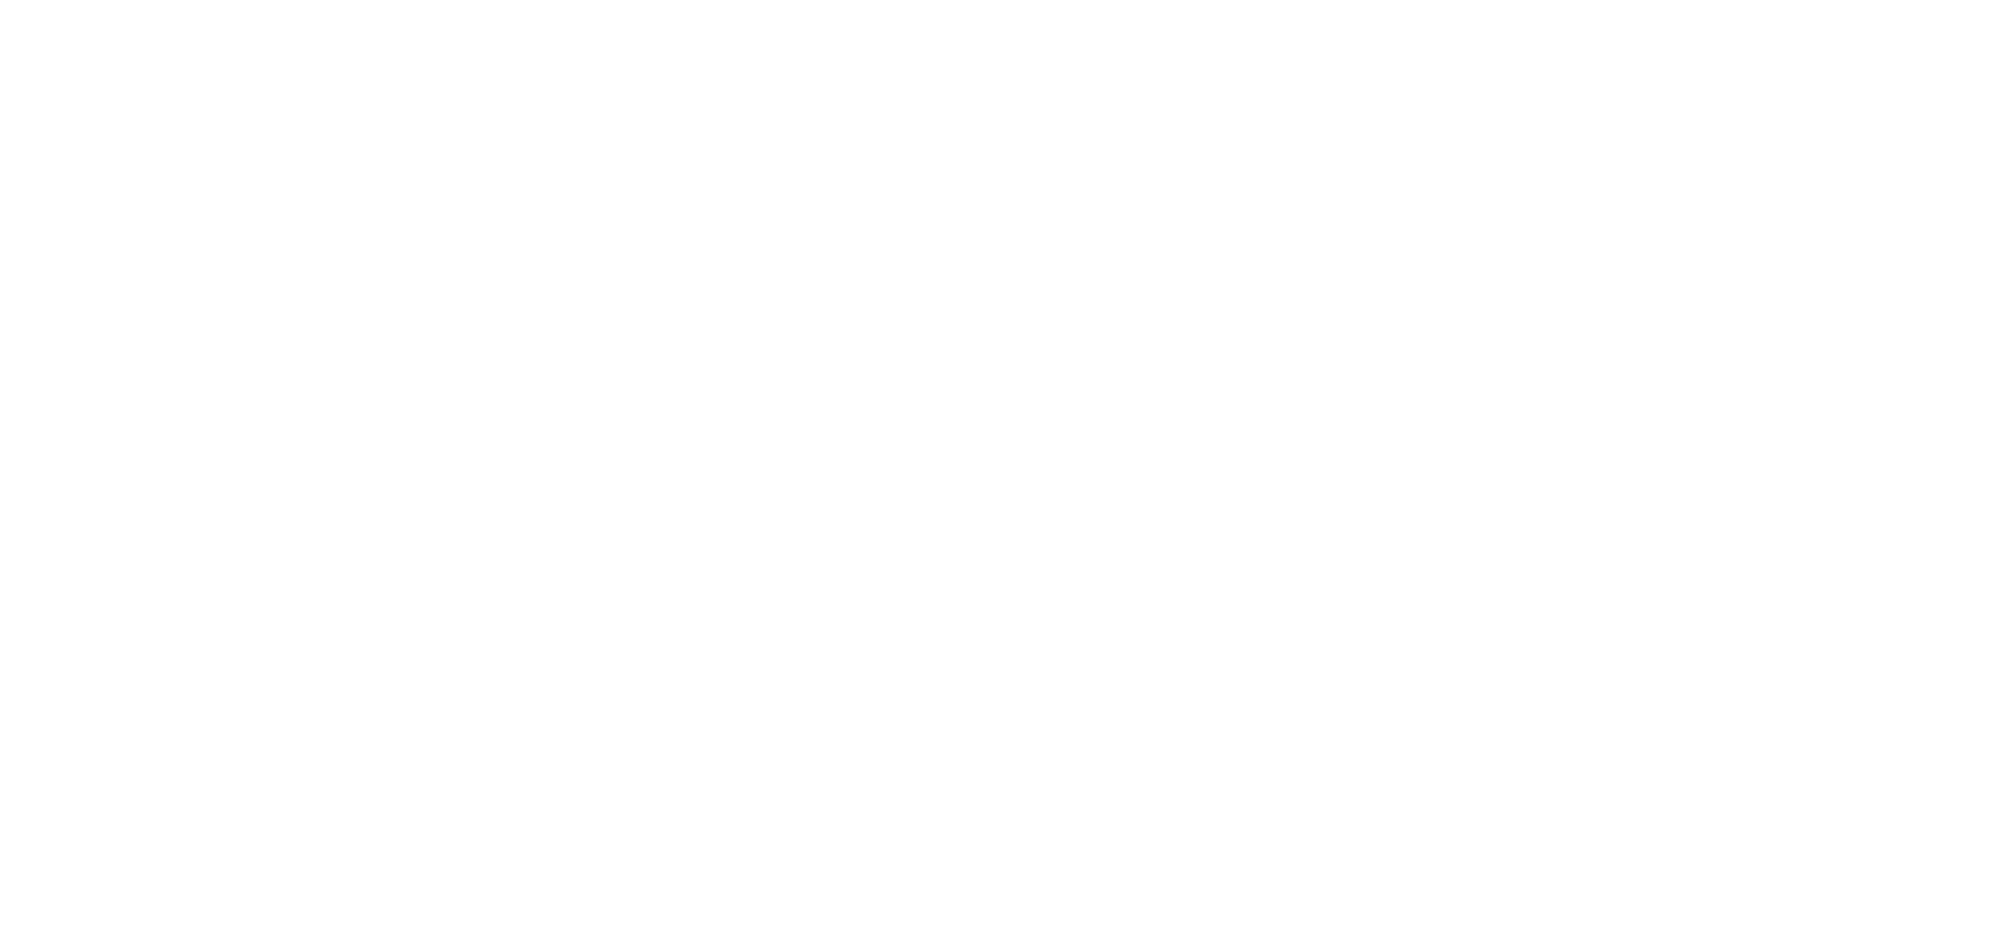 Dedicated: Since 1975, TOTE has delivered the supplies for life to the Last Frontier with twice-weekly sailings between Tacoma, WA and Anchorage, AK.  Our ORCA vessels - custom built for the Alaska trade - provide safe, reliable service with efficient roll-on/roll-off (RO/RO) loading and unloading. No matter what you’re shipping,  TOTE’s dedicated team of logistics experts will make  sure it arrives safely and on-time. text